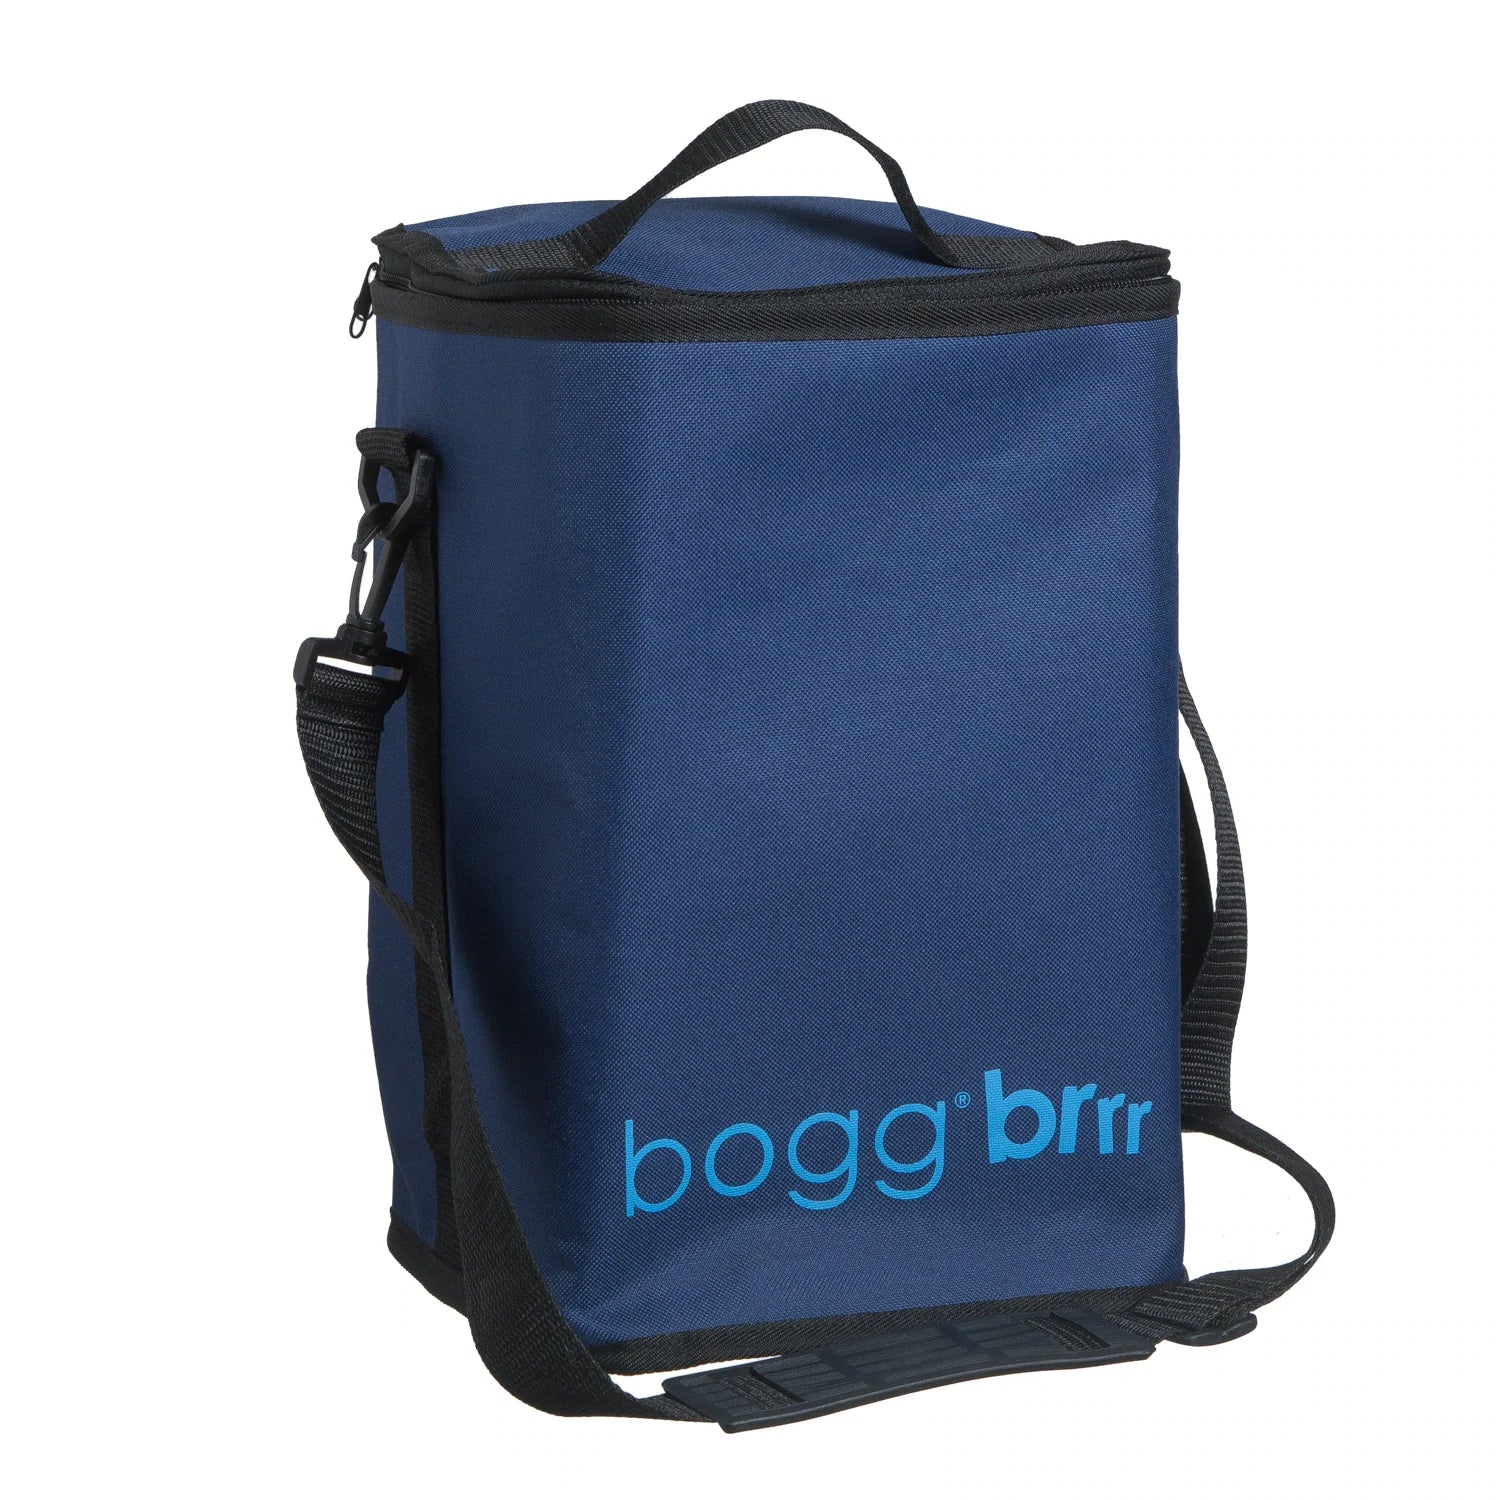 Personalized Bag Bogg Bag Personalized Insert Bag 